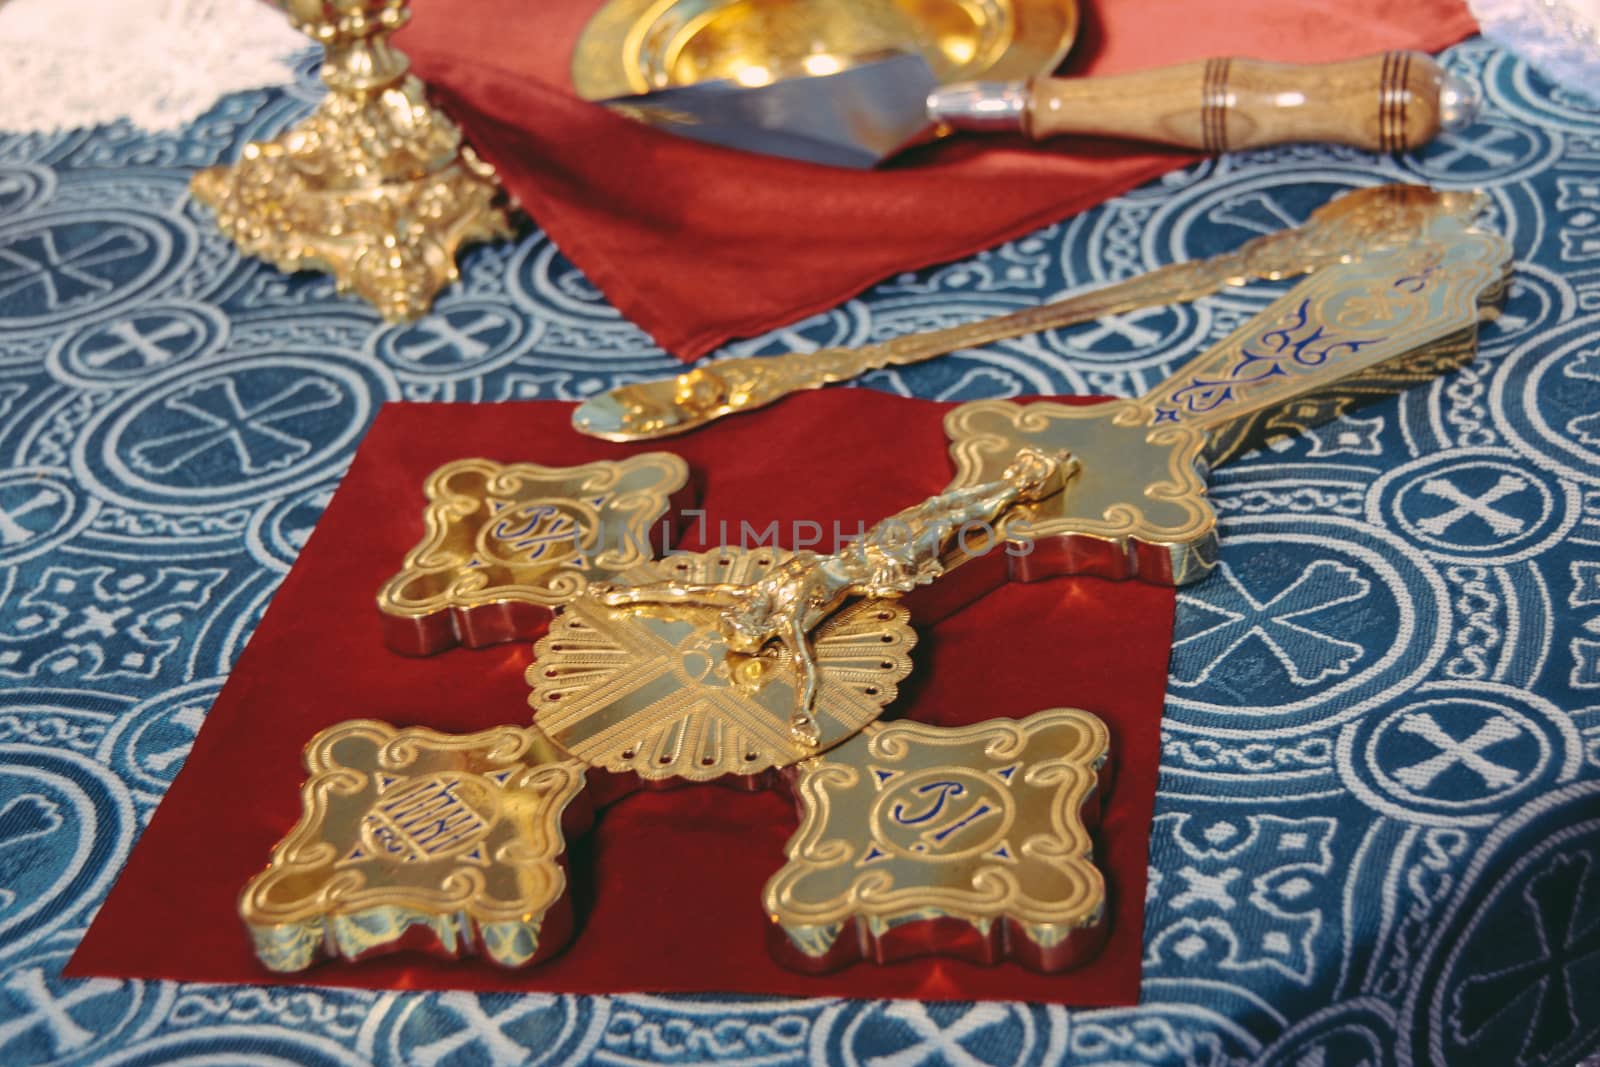 Orthodox cross on the table ceremony in christianity church. Shallow depth of field.